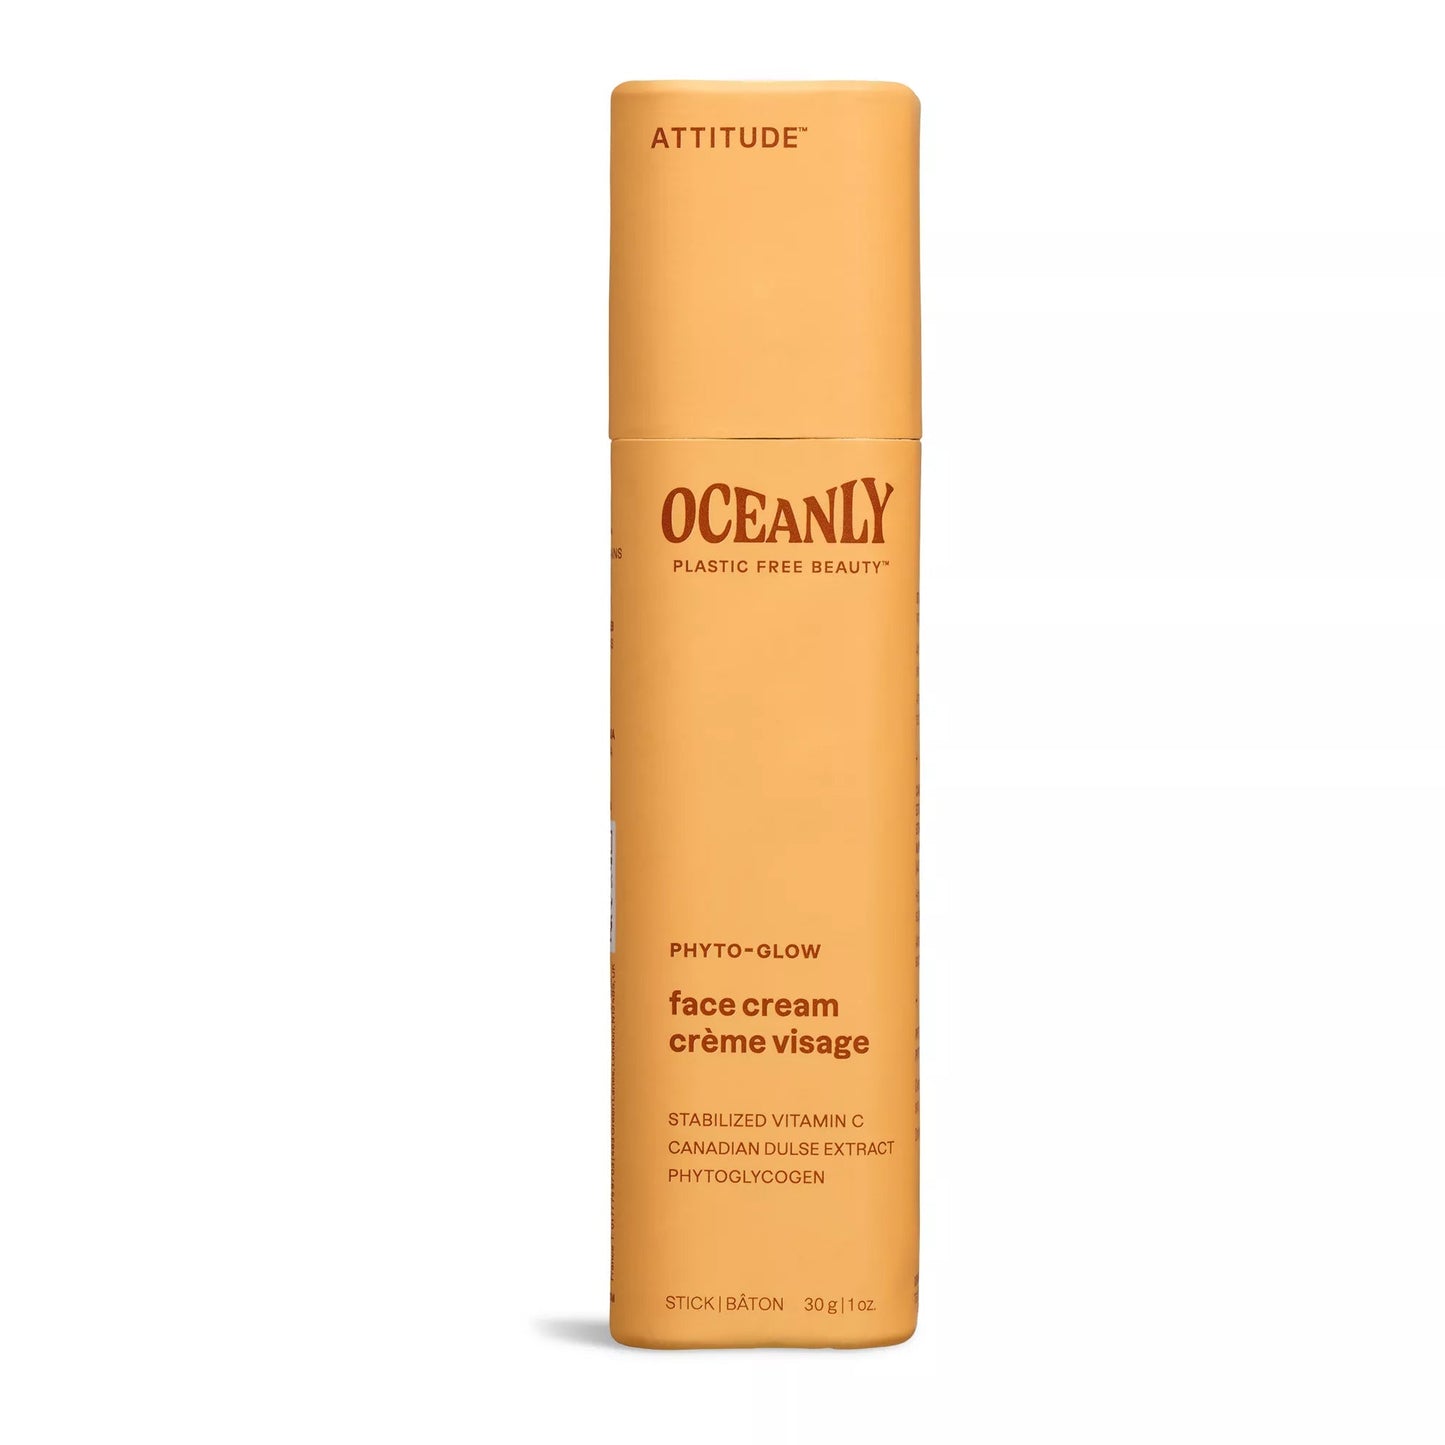 ATTITUDE Oceanly Phyto-Glow Face Cream with Vitamin C Unscented 30g 16052_en?